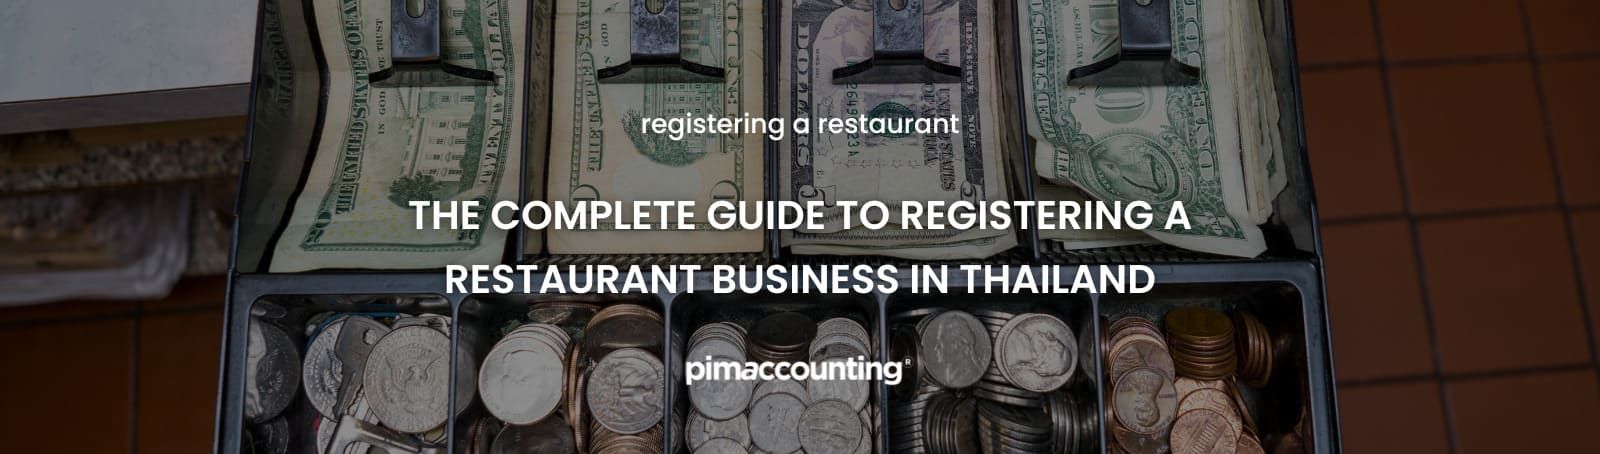 The complete guide to registering a restaurant business in Thailand - Pimaccounting